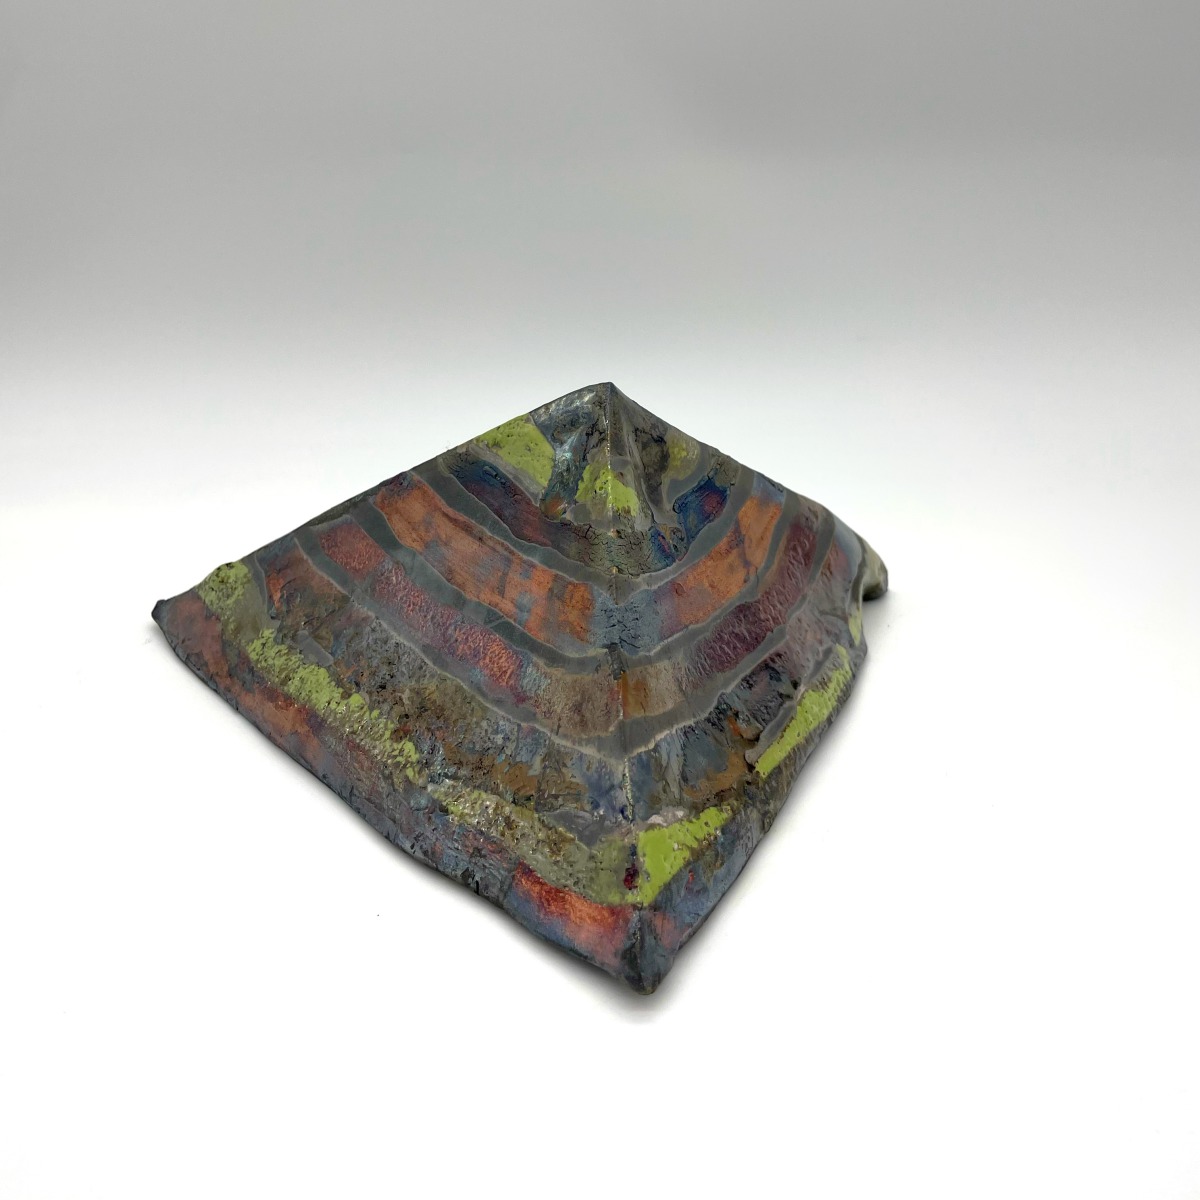 Low Green and Copper Pyramid, medium